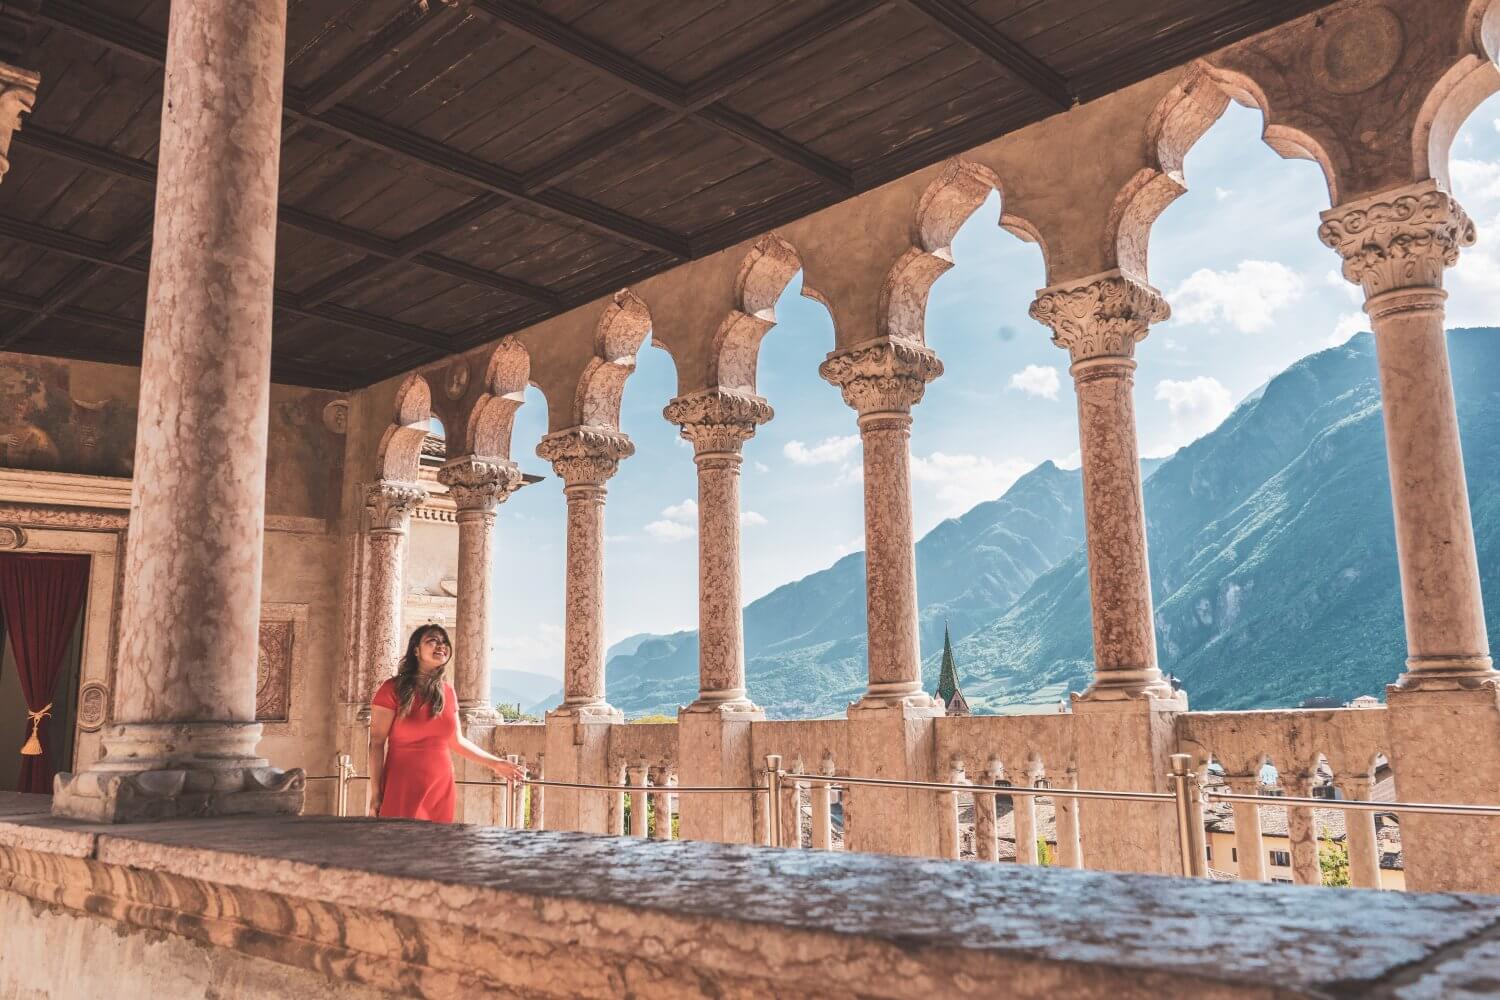 Looking for hidden gems to visit in Italy? This is why you need to visit the underrated province of Trentino! #Trentino #Trento #Rovereto 